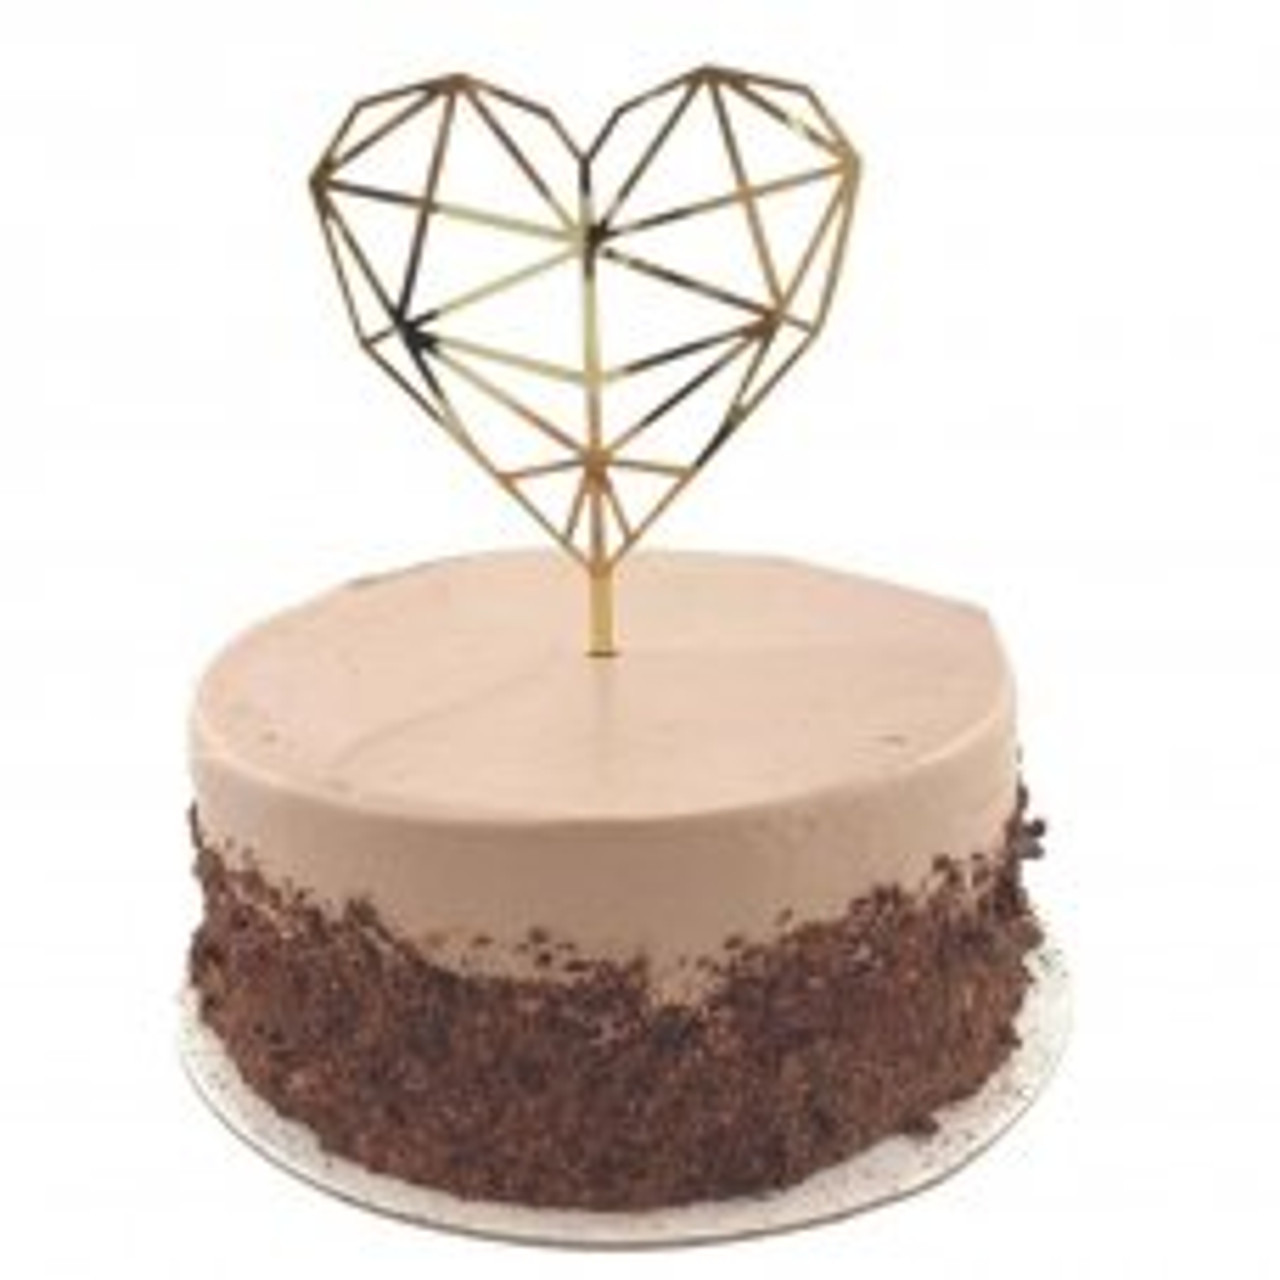 443029 CAKE TOPPER ACRYLIC HEX HEART GOLD